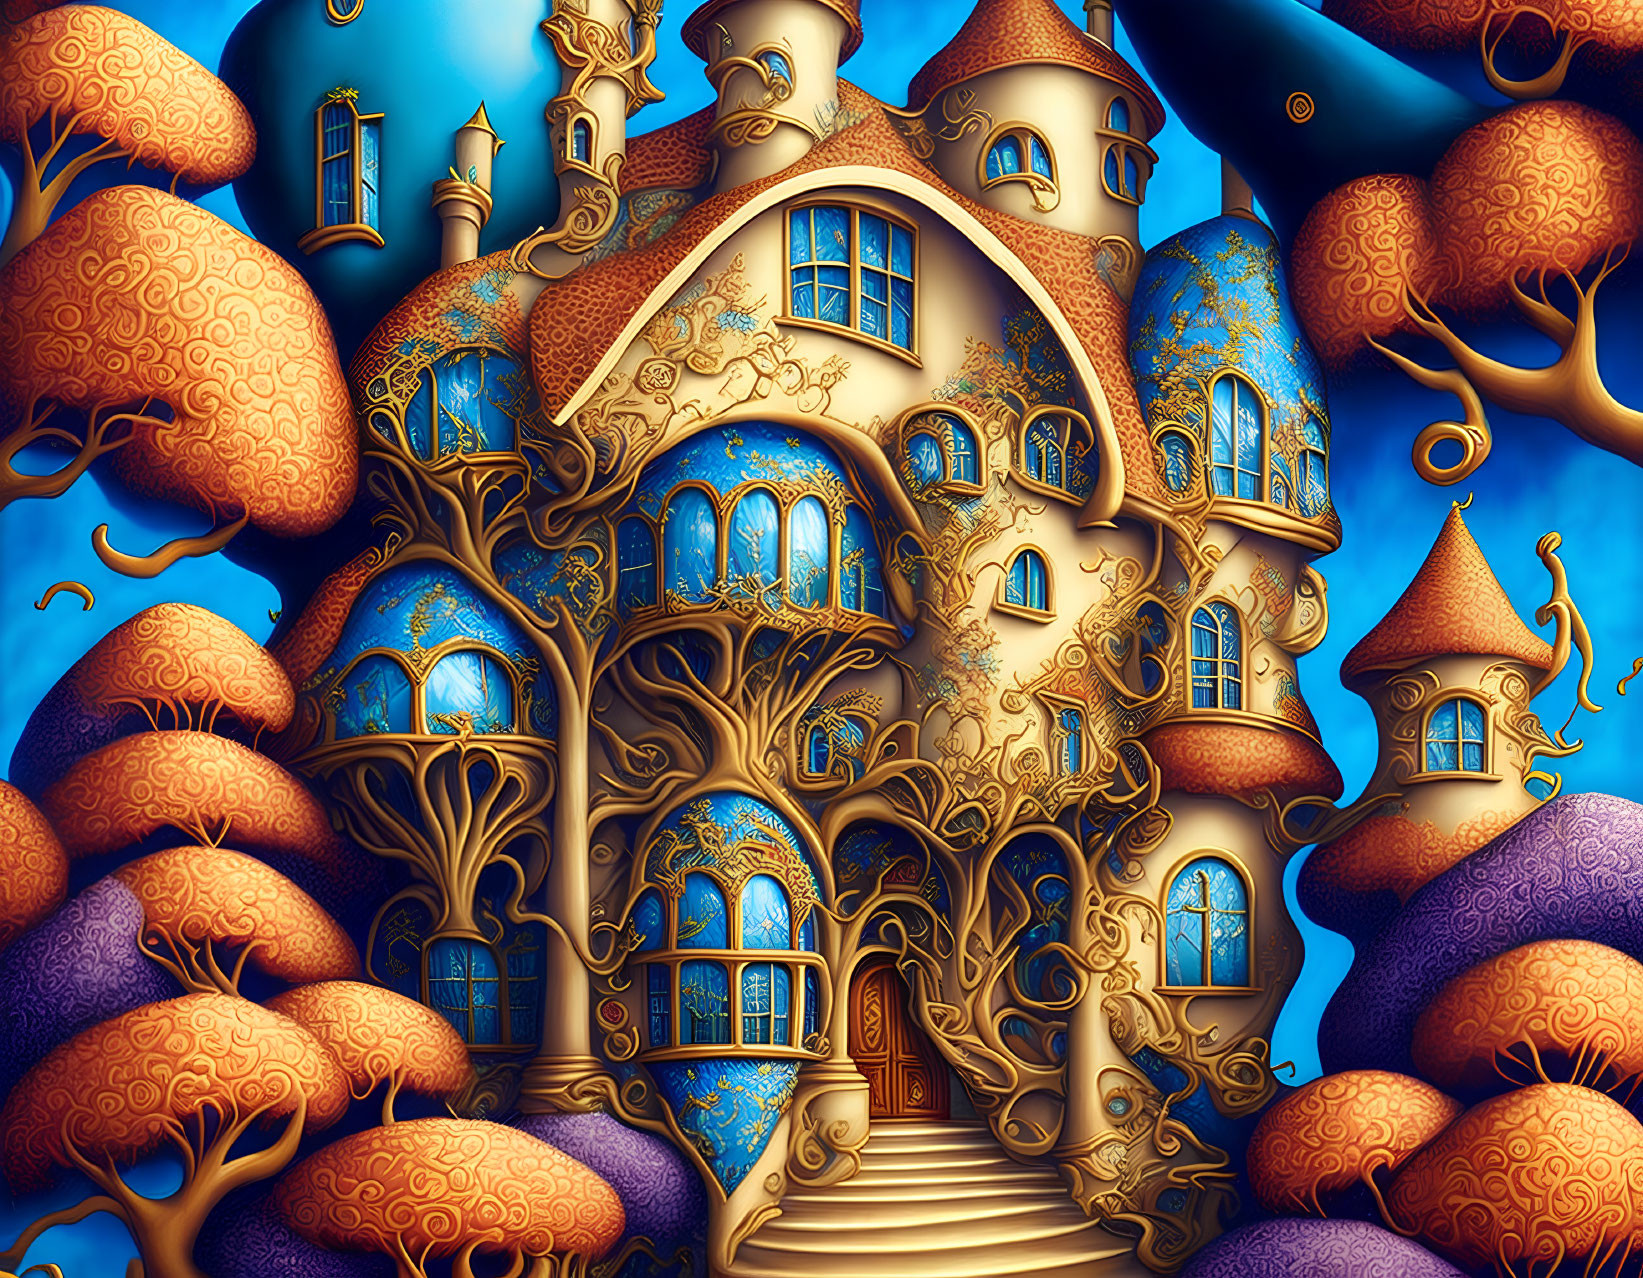 Whimsical fantasy illustration of a house with blue roofs and golden tree-like embellishments amidst vibrant oversized